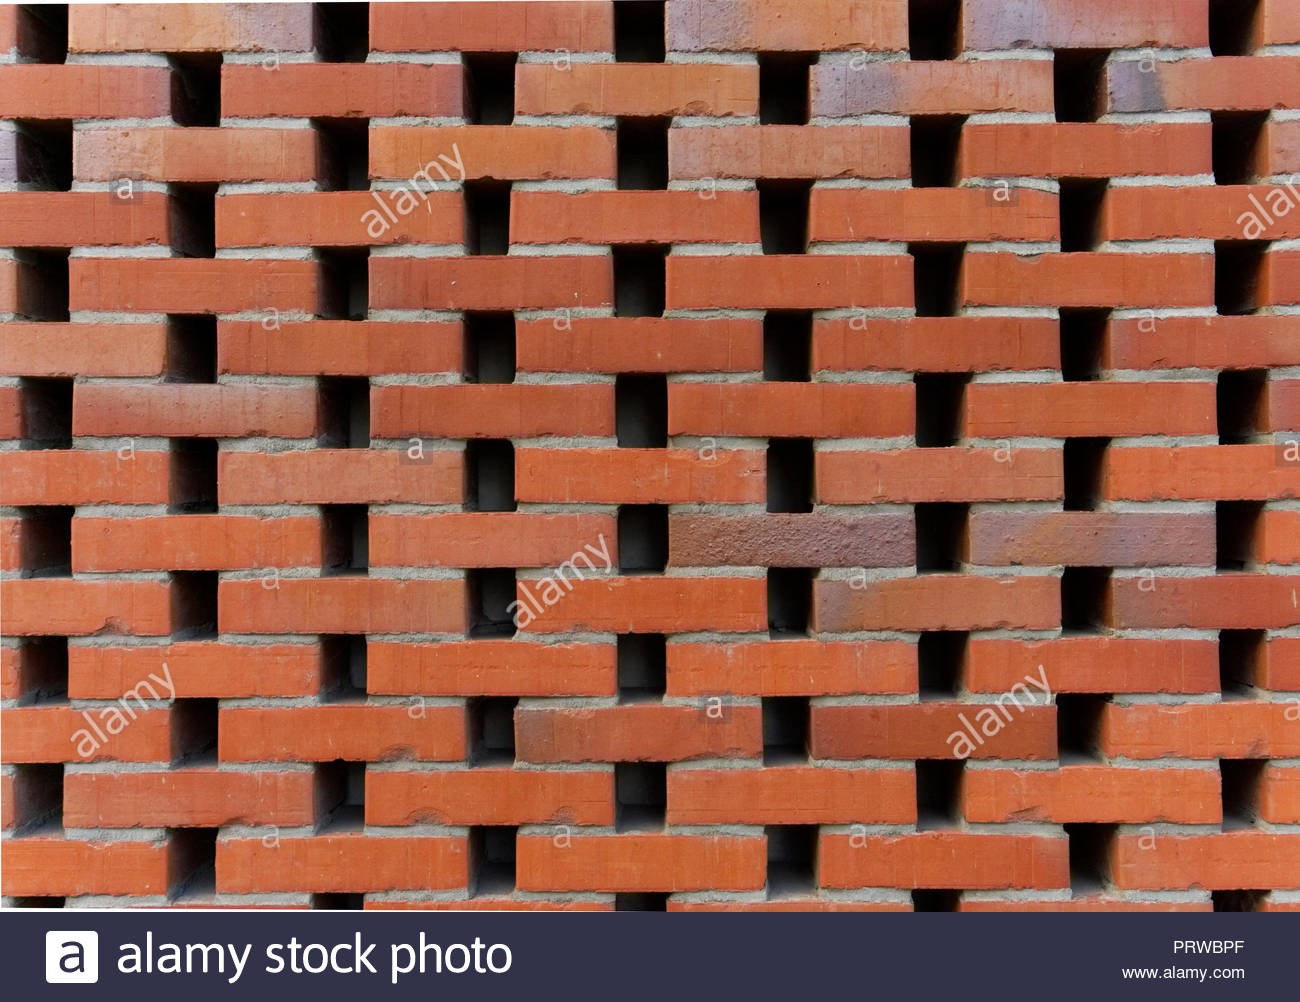 Bricks With Holes High Resolution Stock Photography and Images - Alamy